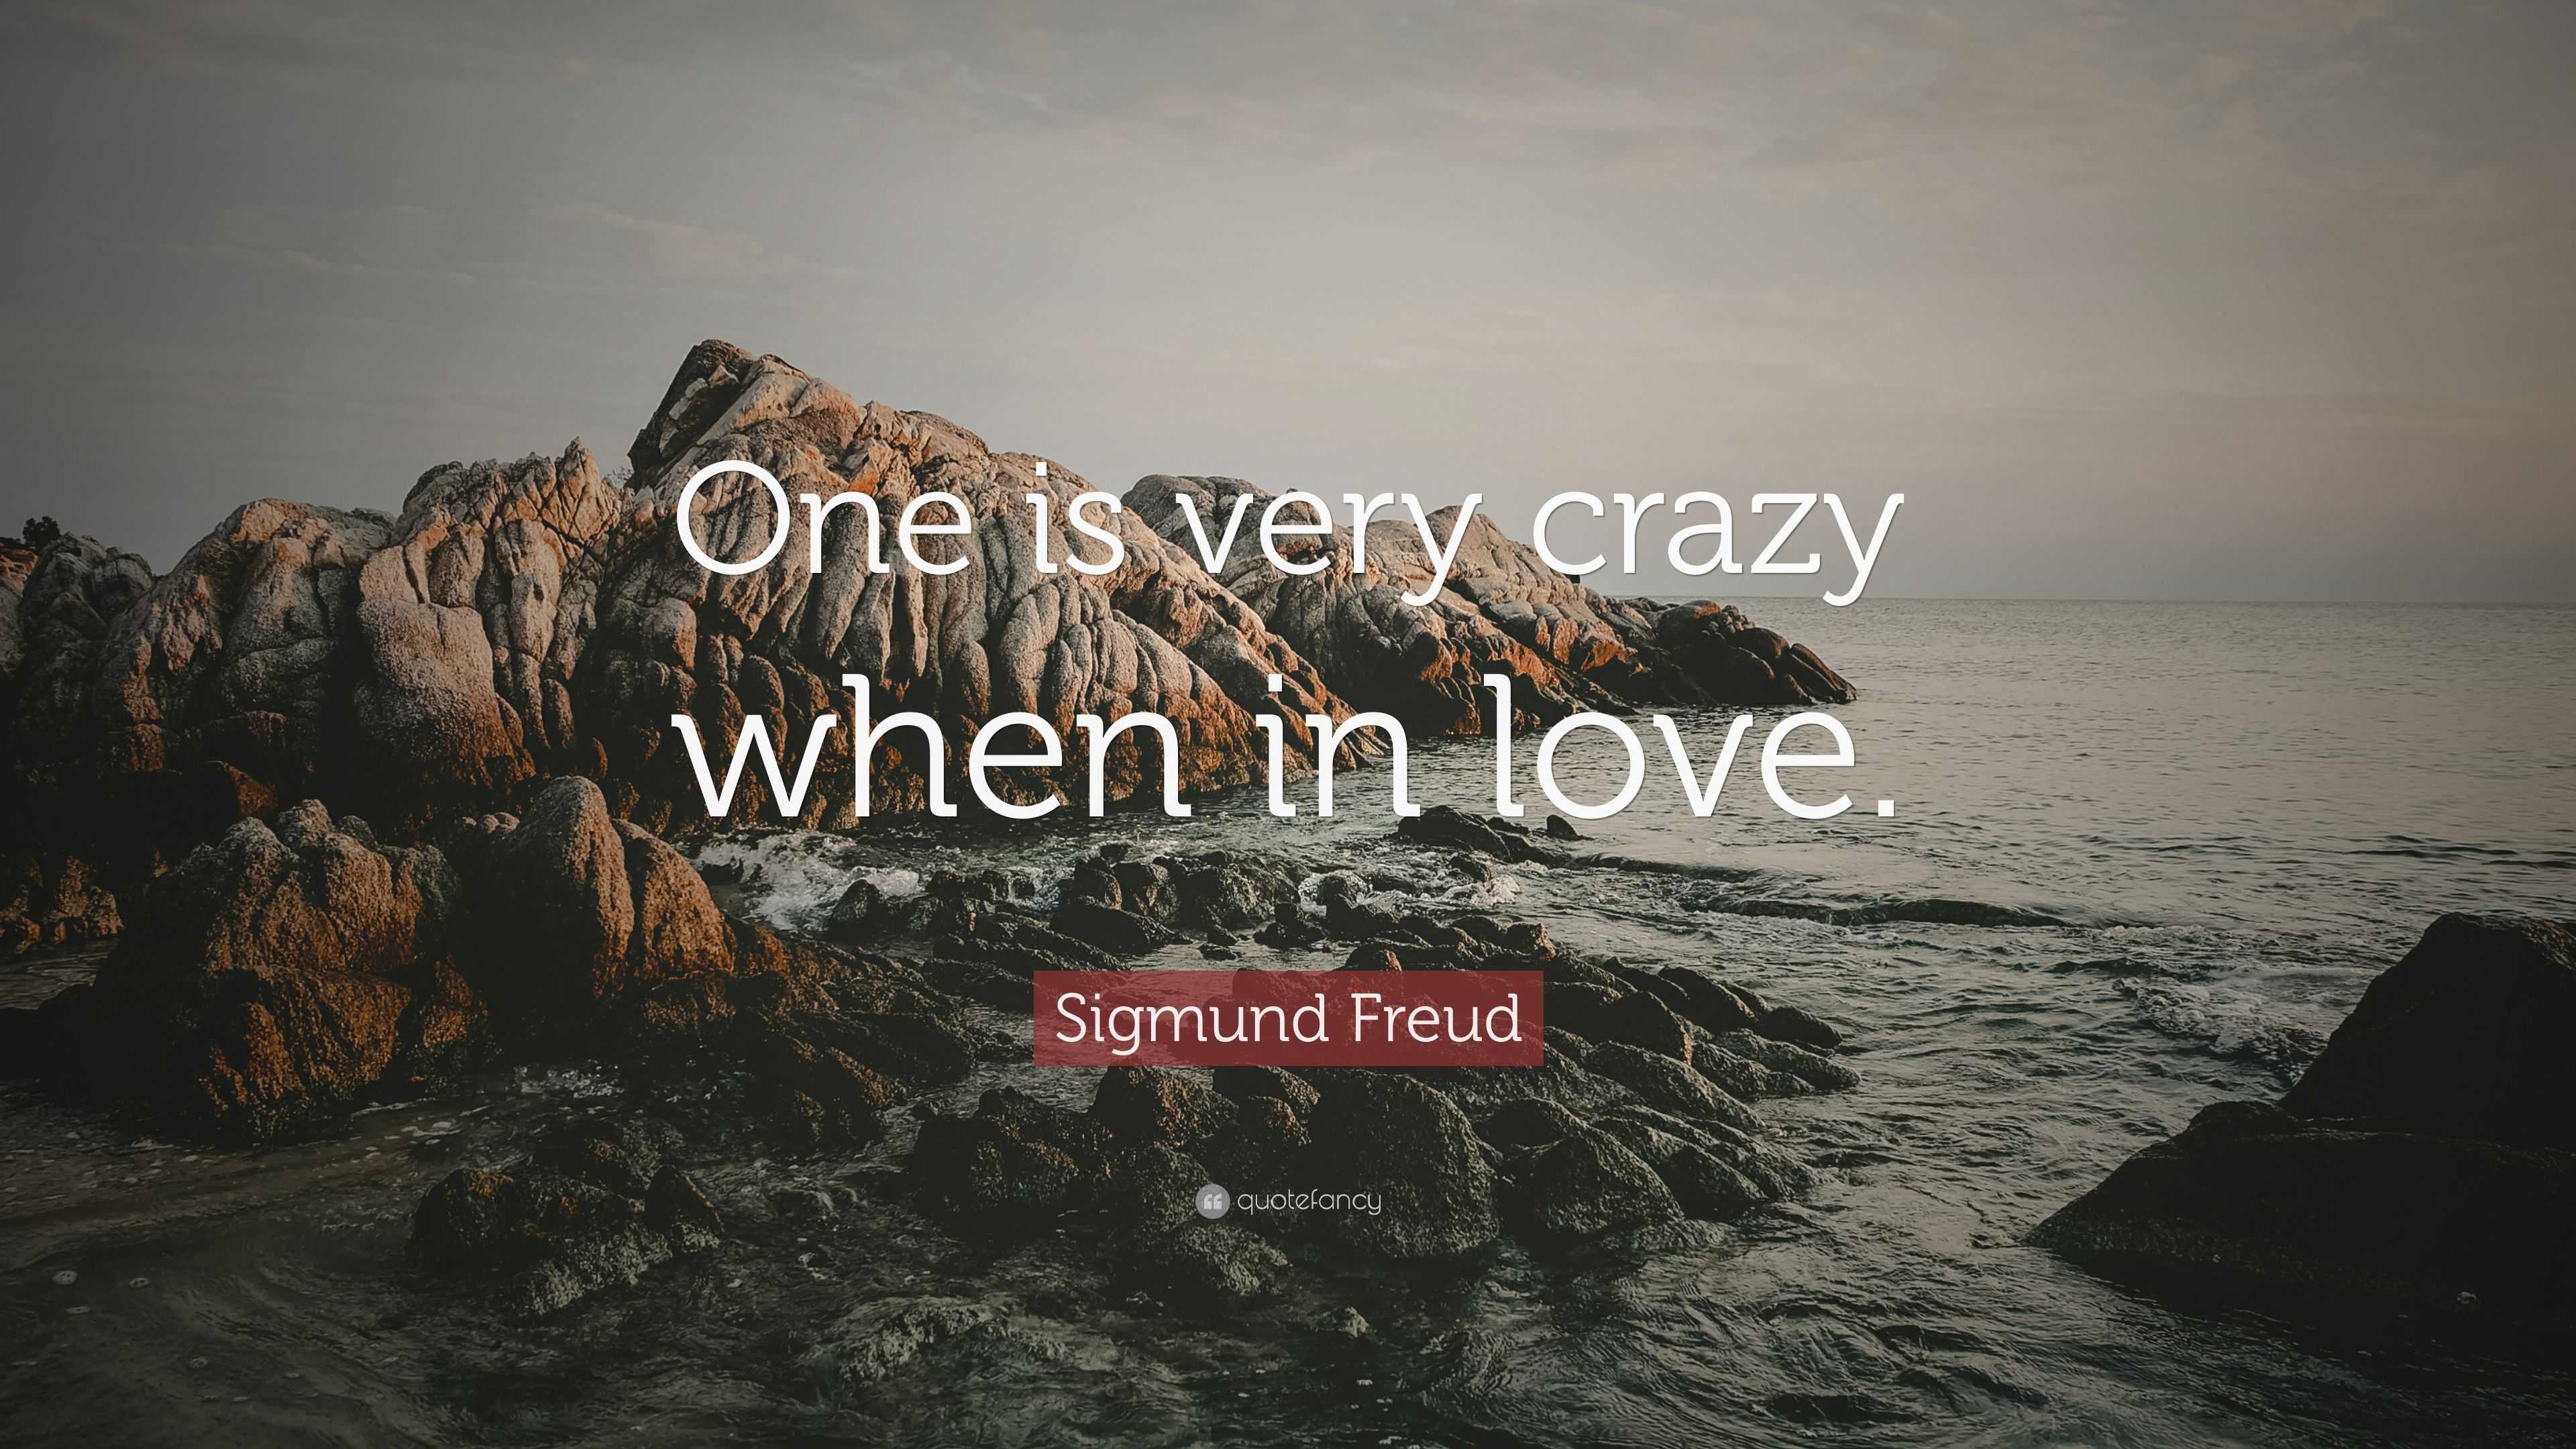 Sigmund Freud Quote: “One is very crazy when in love.”